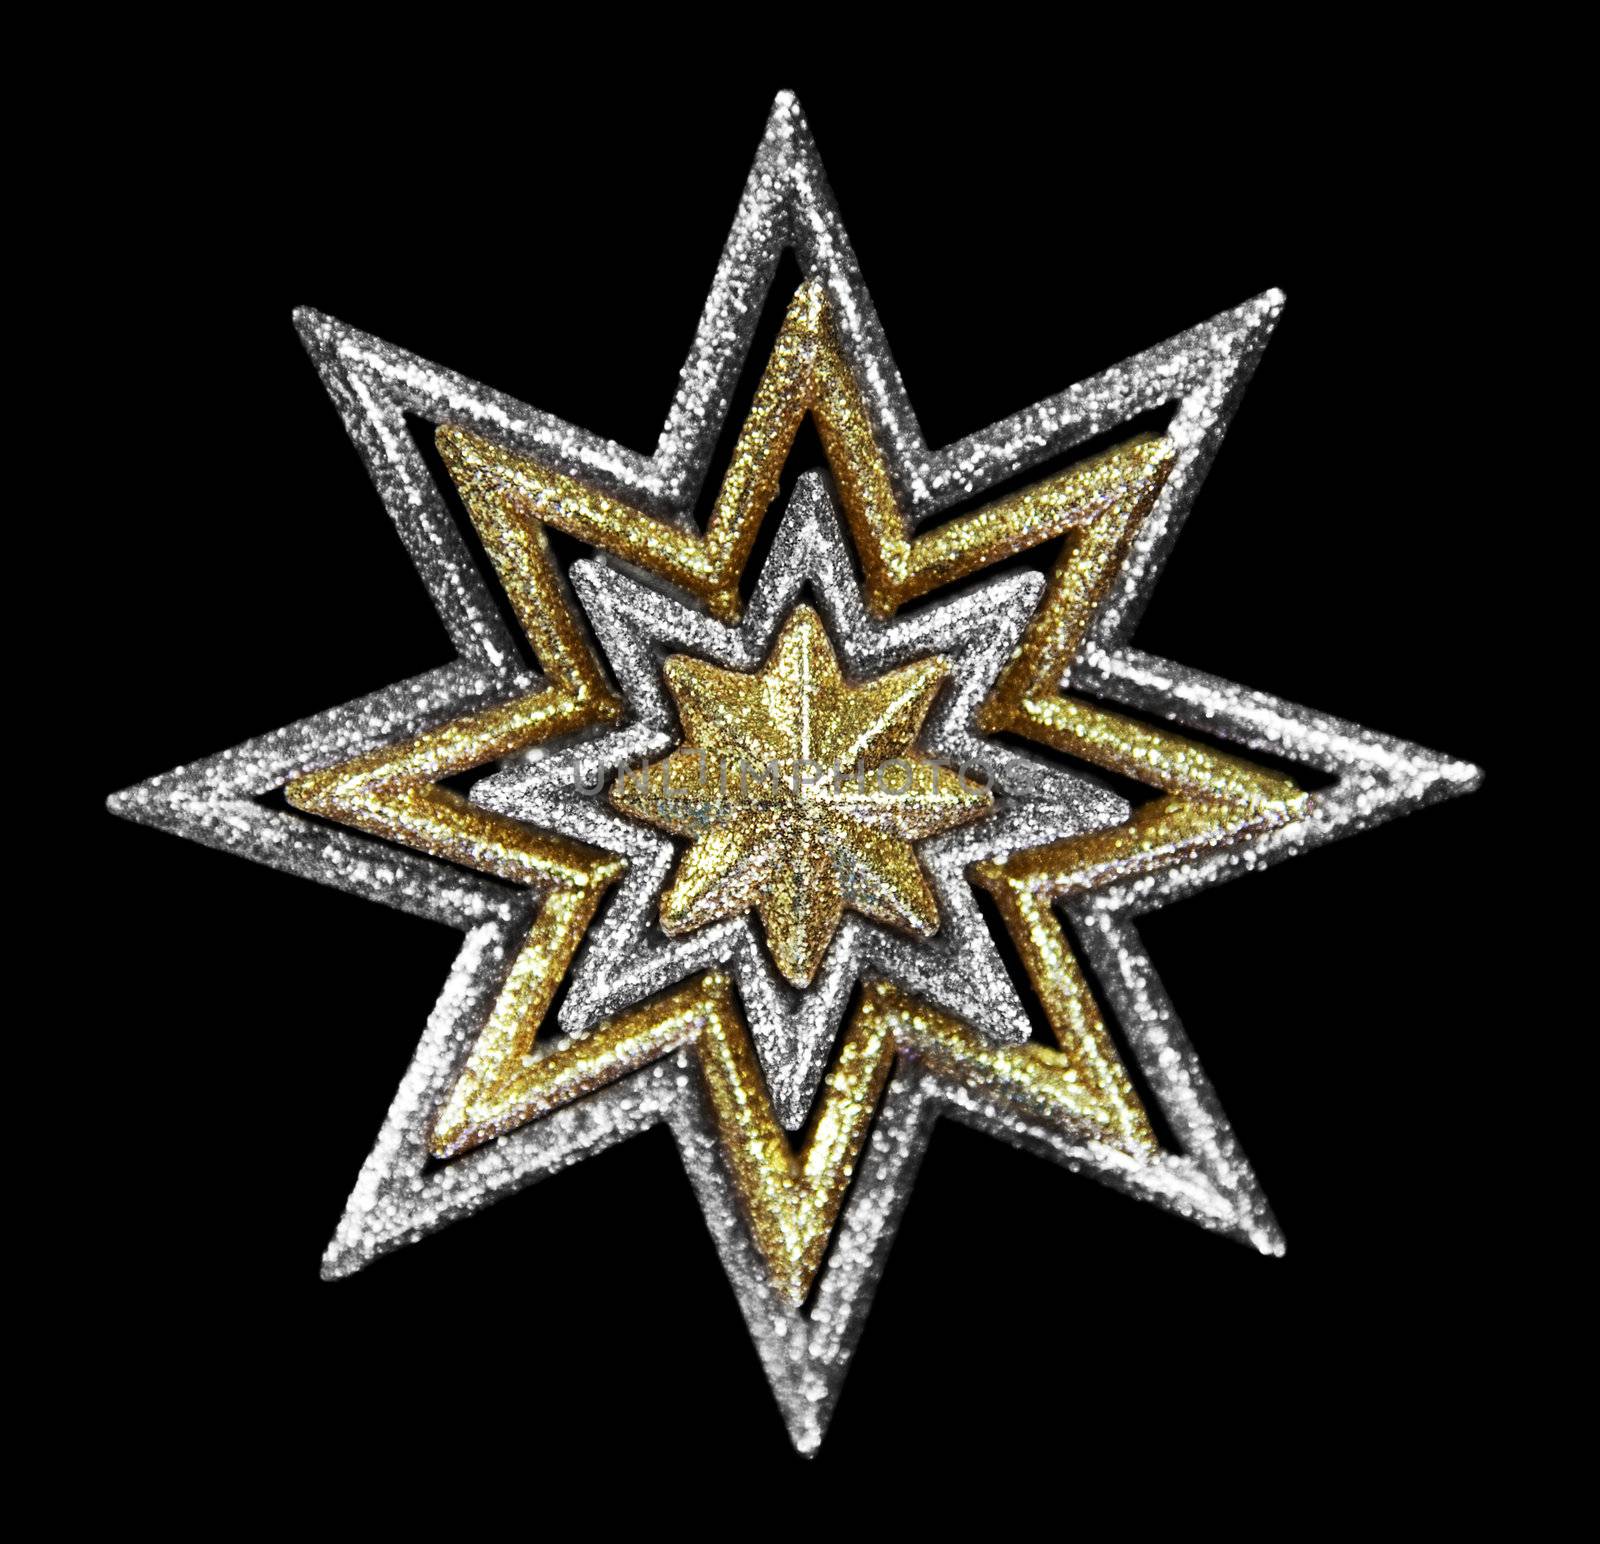 A gold and silver Christmas star against black